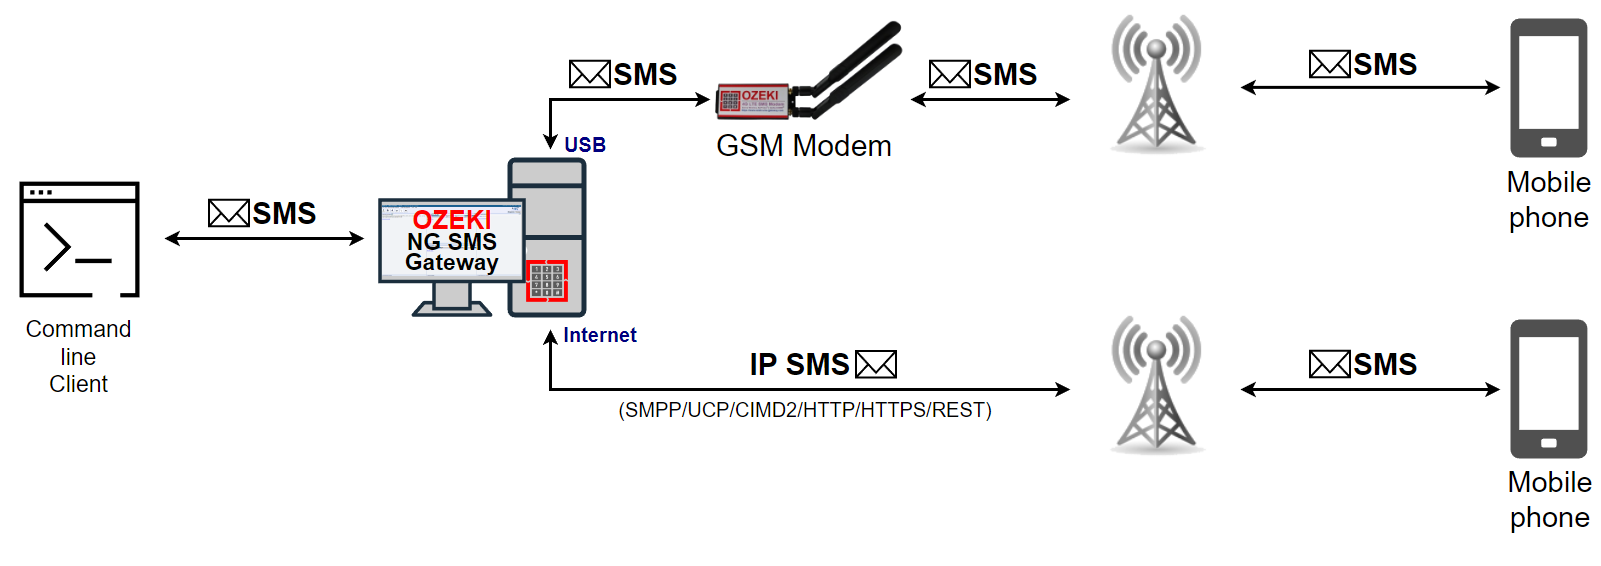 send sms from command line client through ozeki ng sms gateway